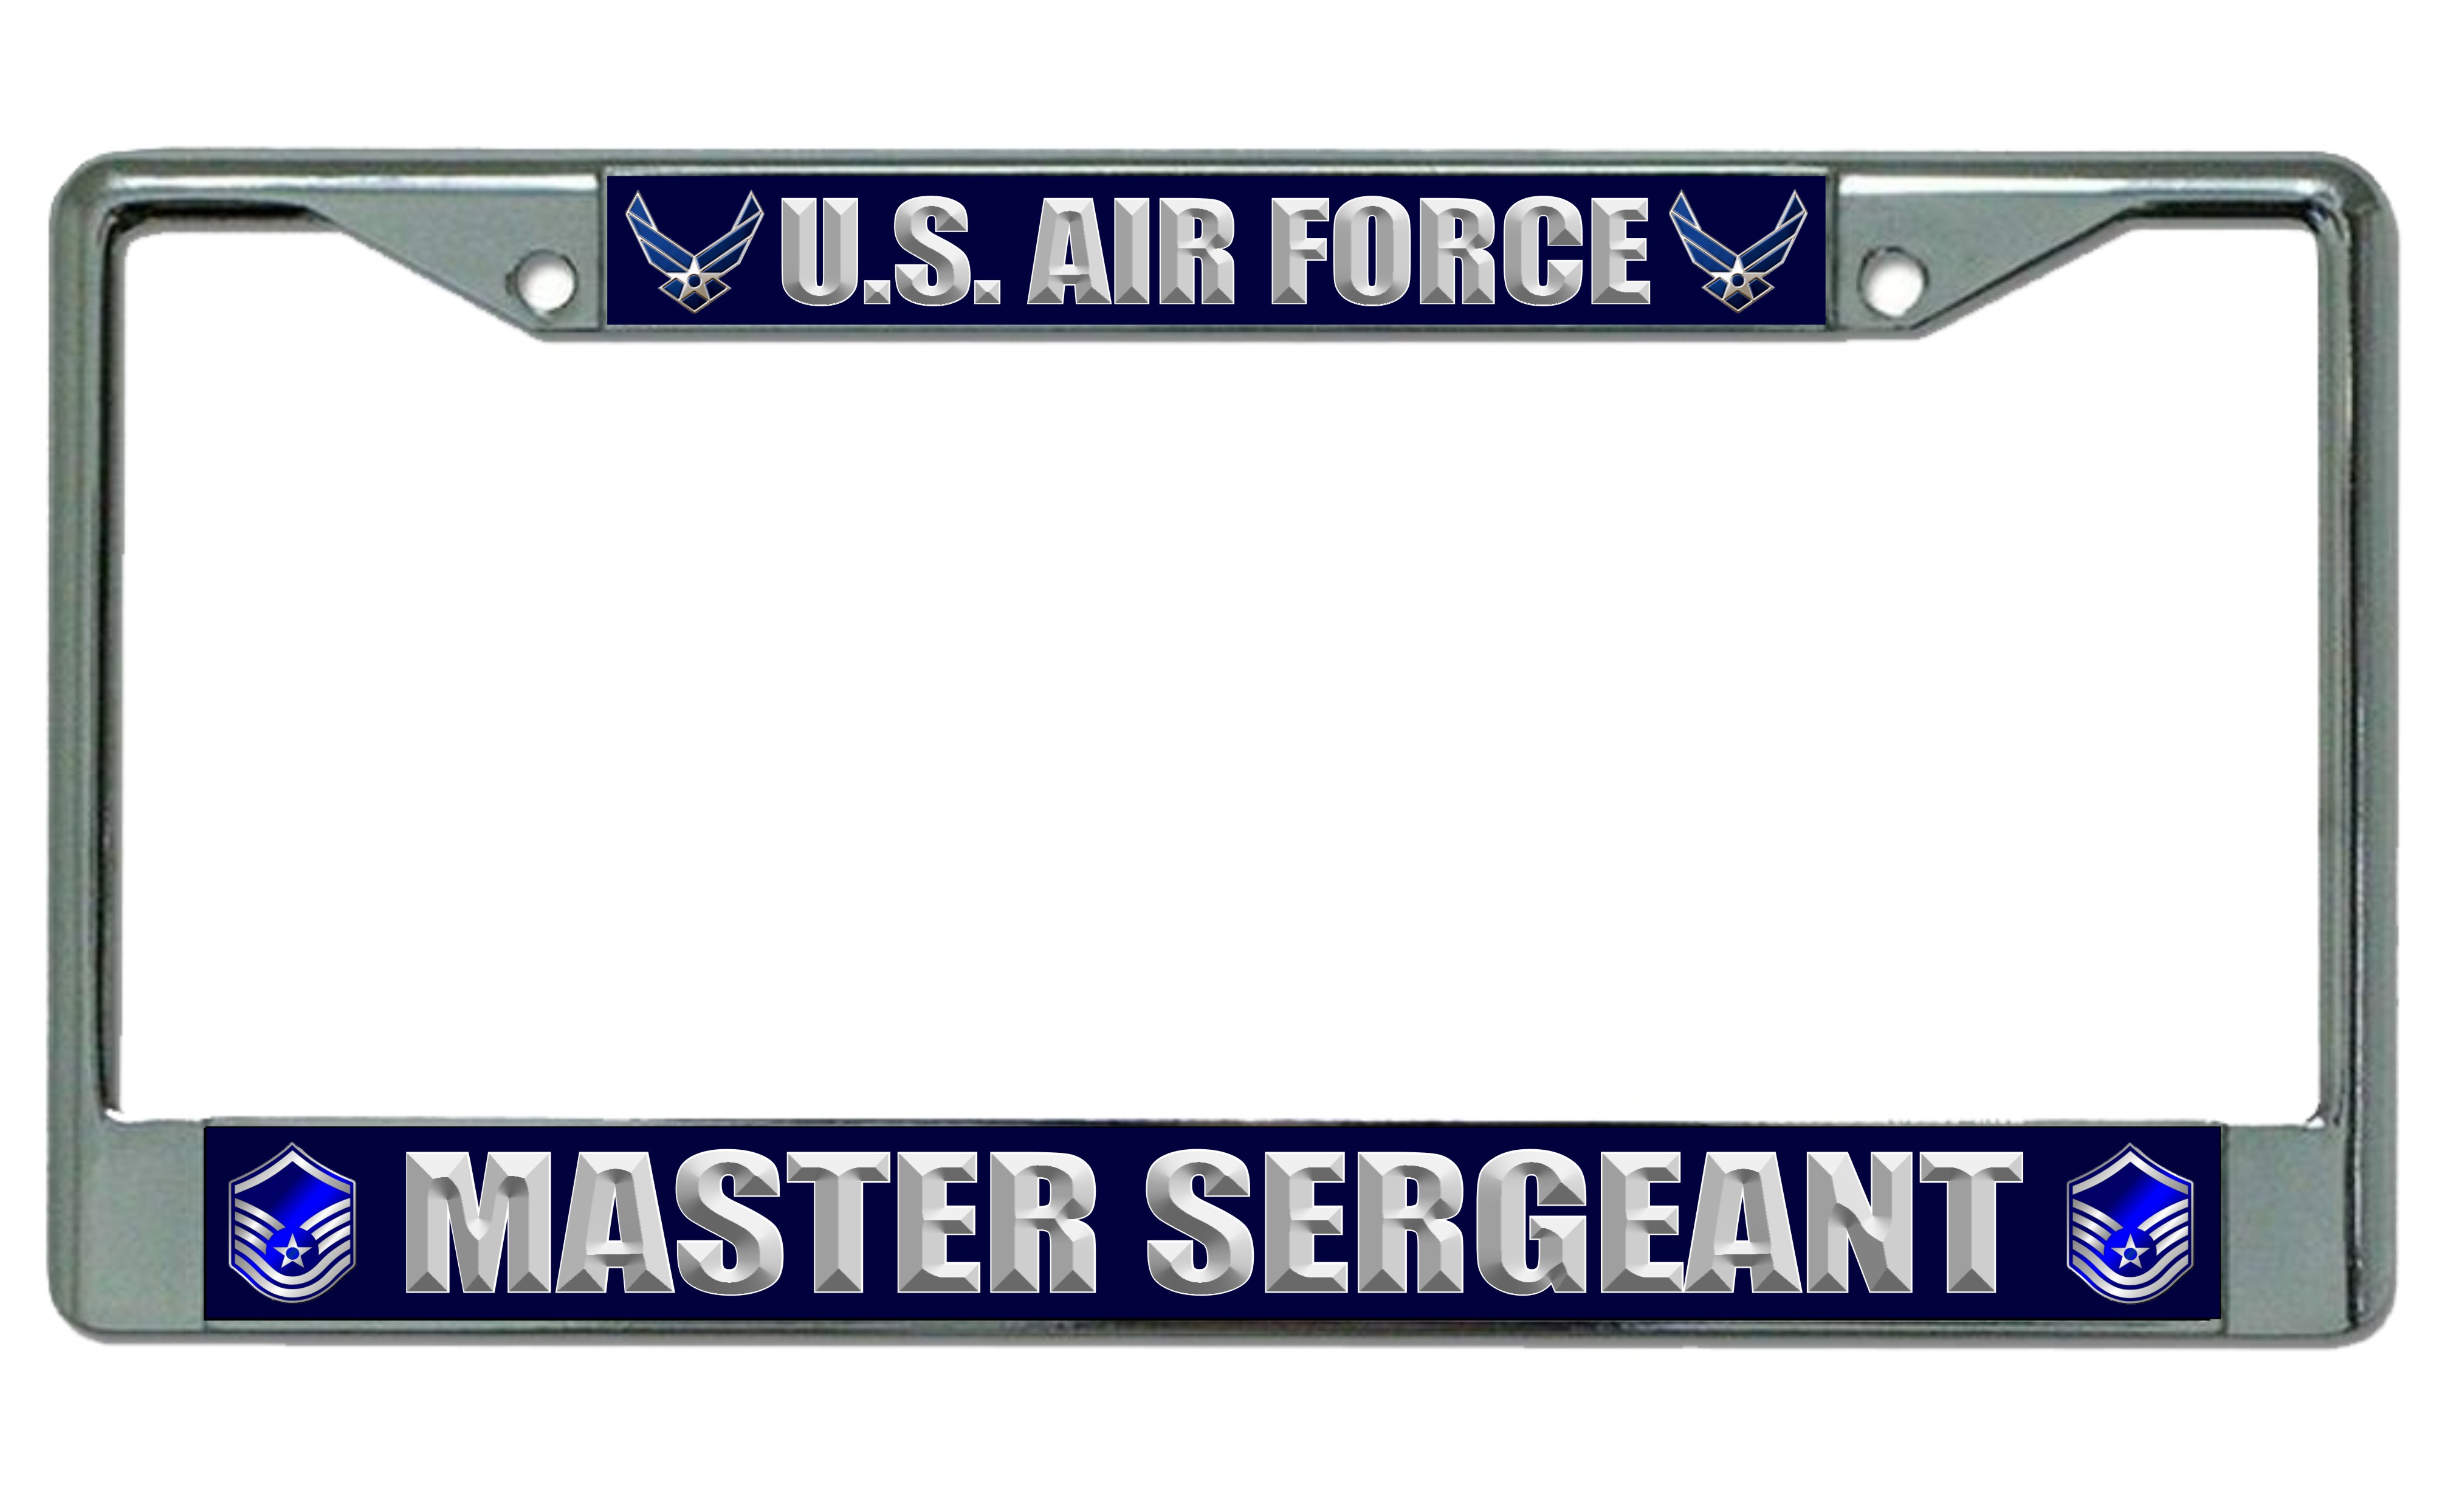 U.S. Air Force Master Sergeant Photo License Frame.  Free SCREW Caps Included